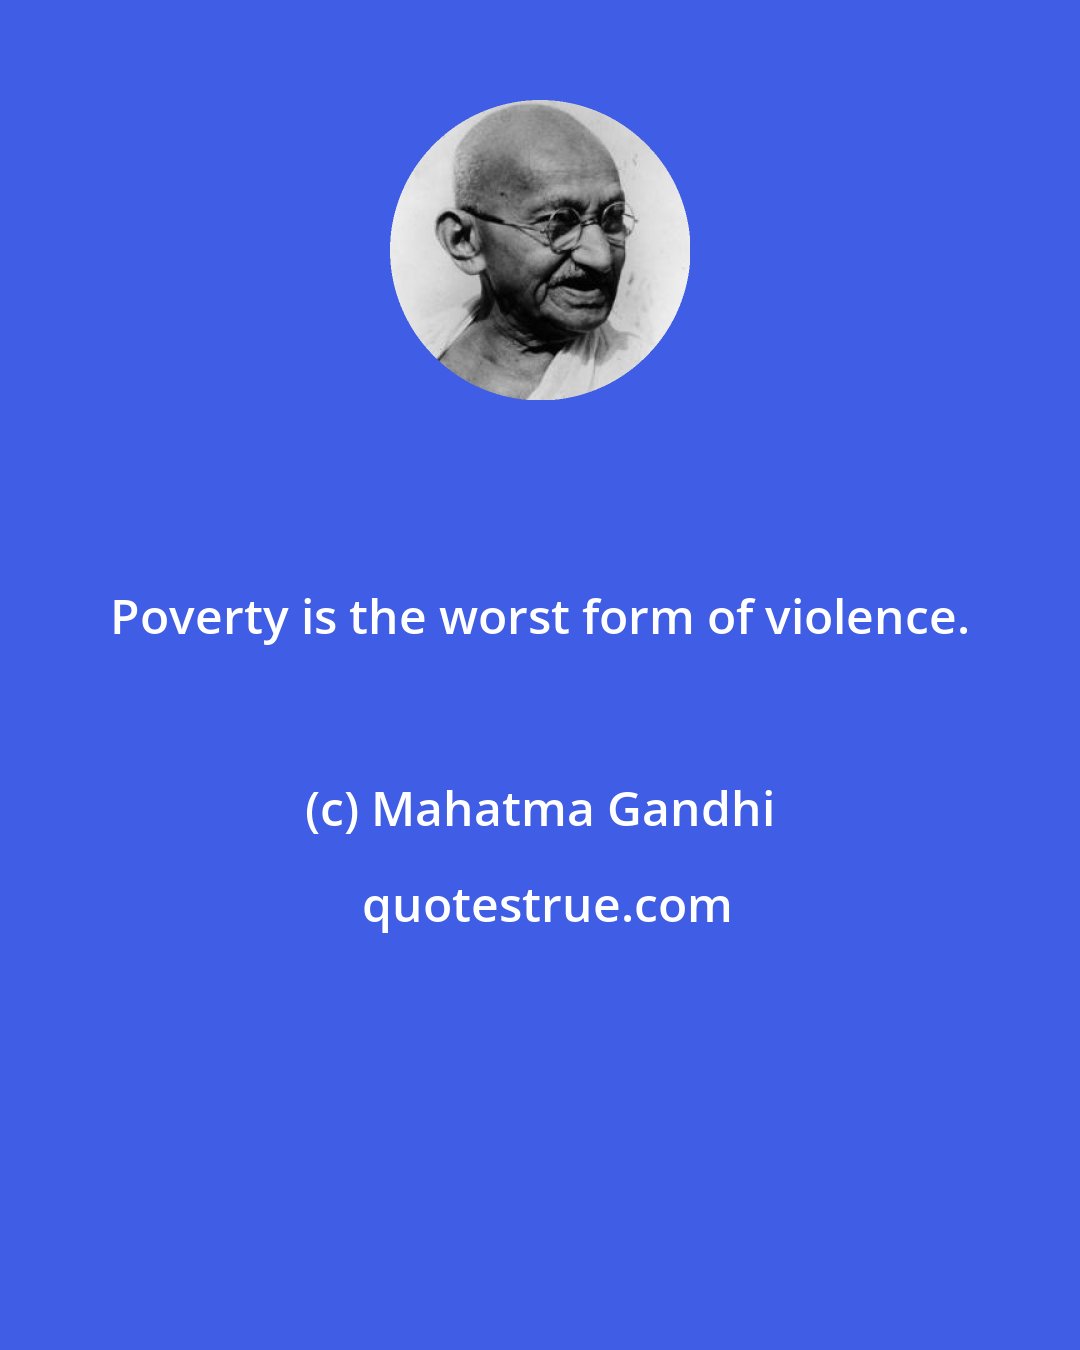 Mahatma Gandhi: Poverty is the worst form of violence.